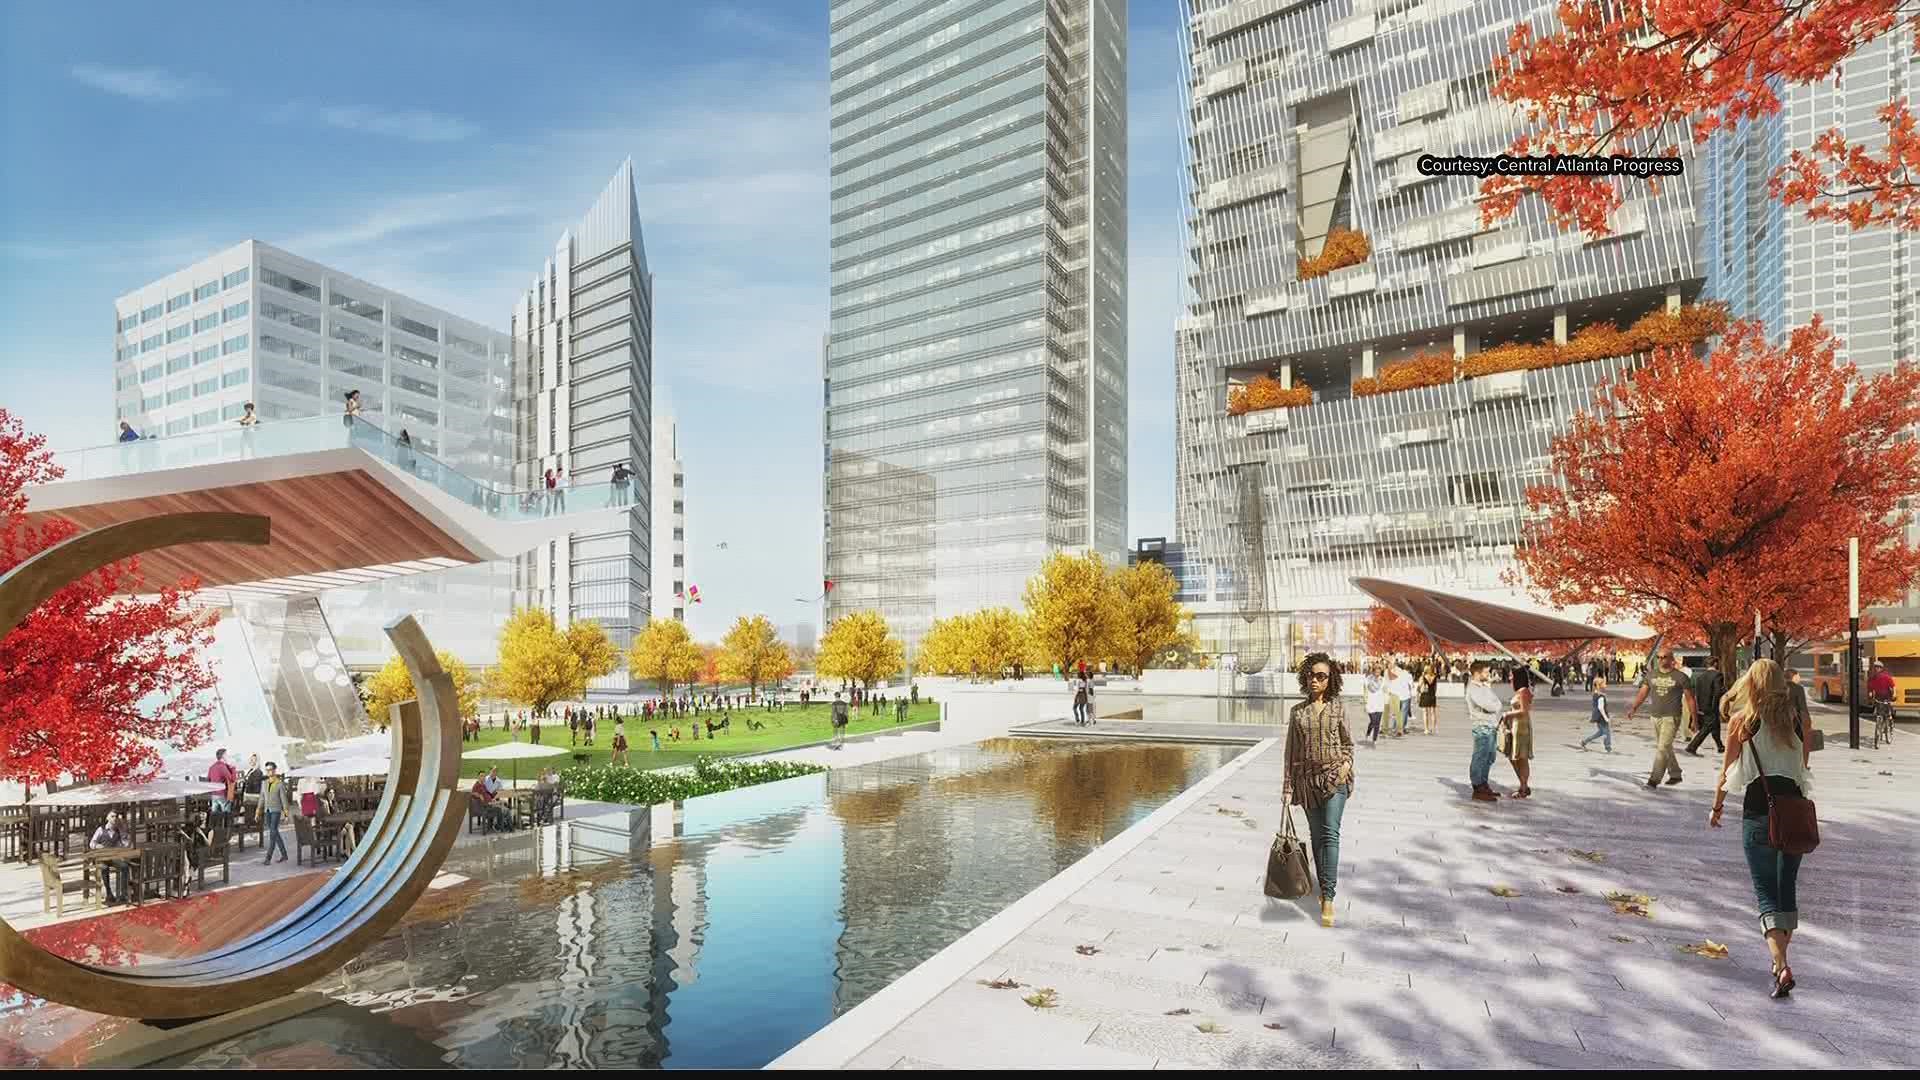 The City of Atlanta is one step closer to transforming 14 acres of land between downtown and midtown. Developers call the project: The Stitch.